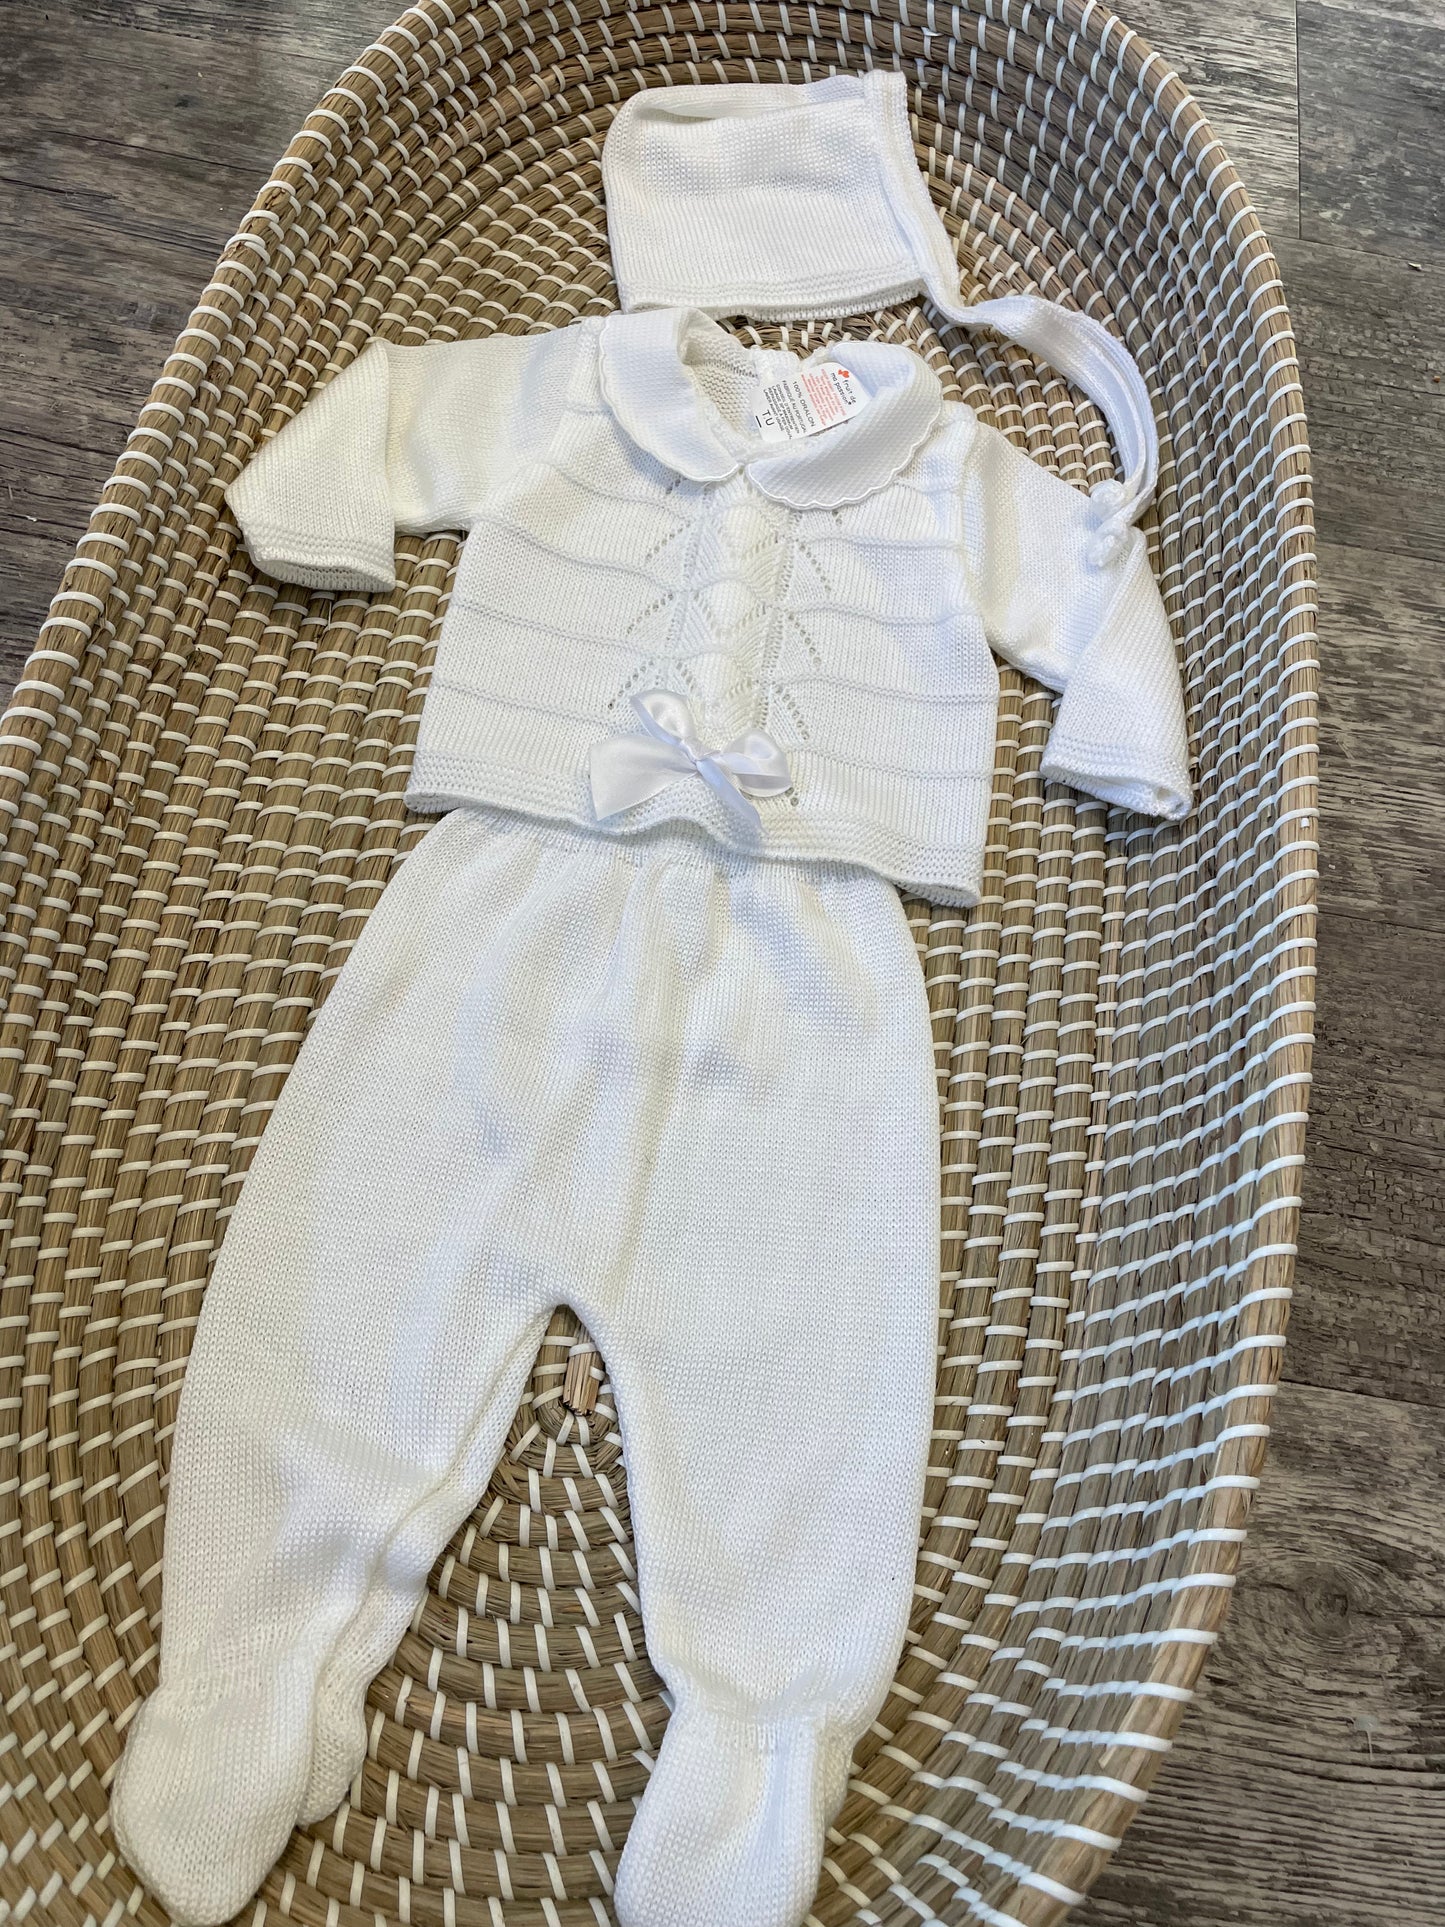 New born knitted set - White with bow